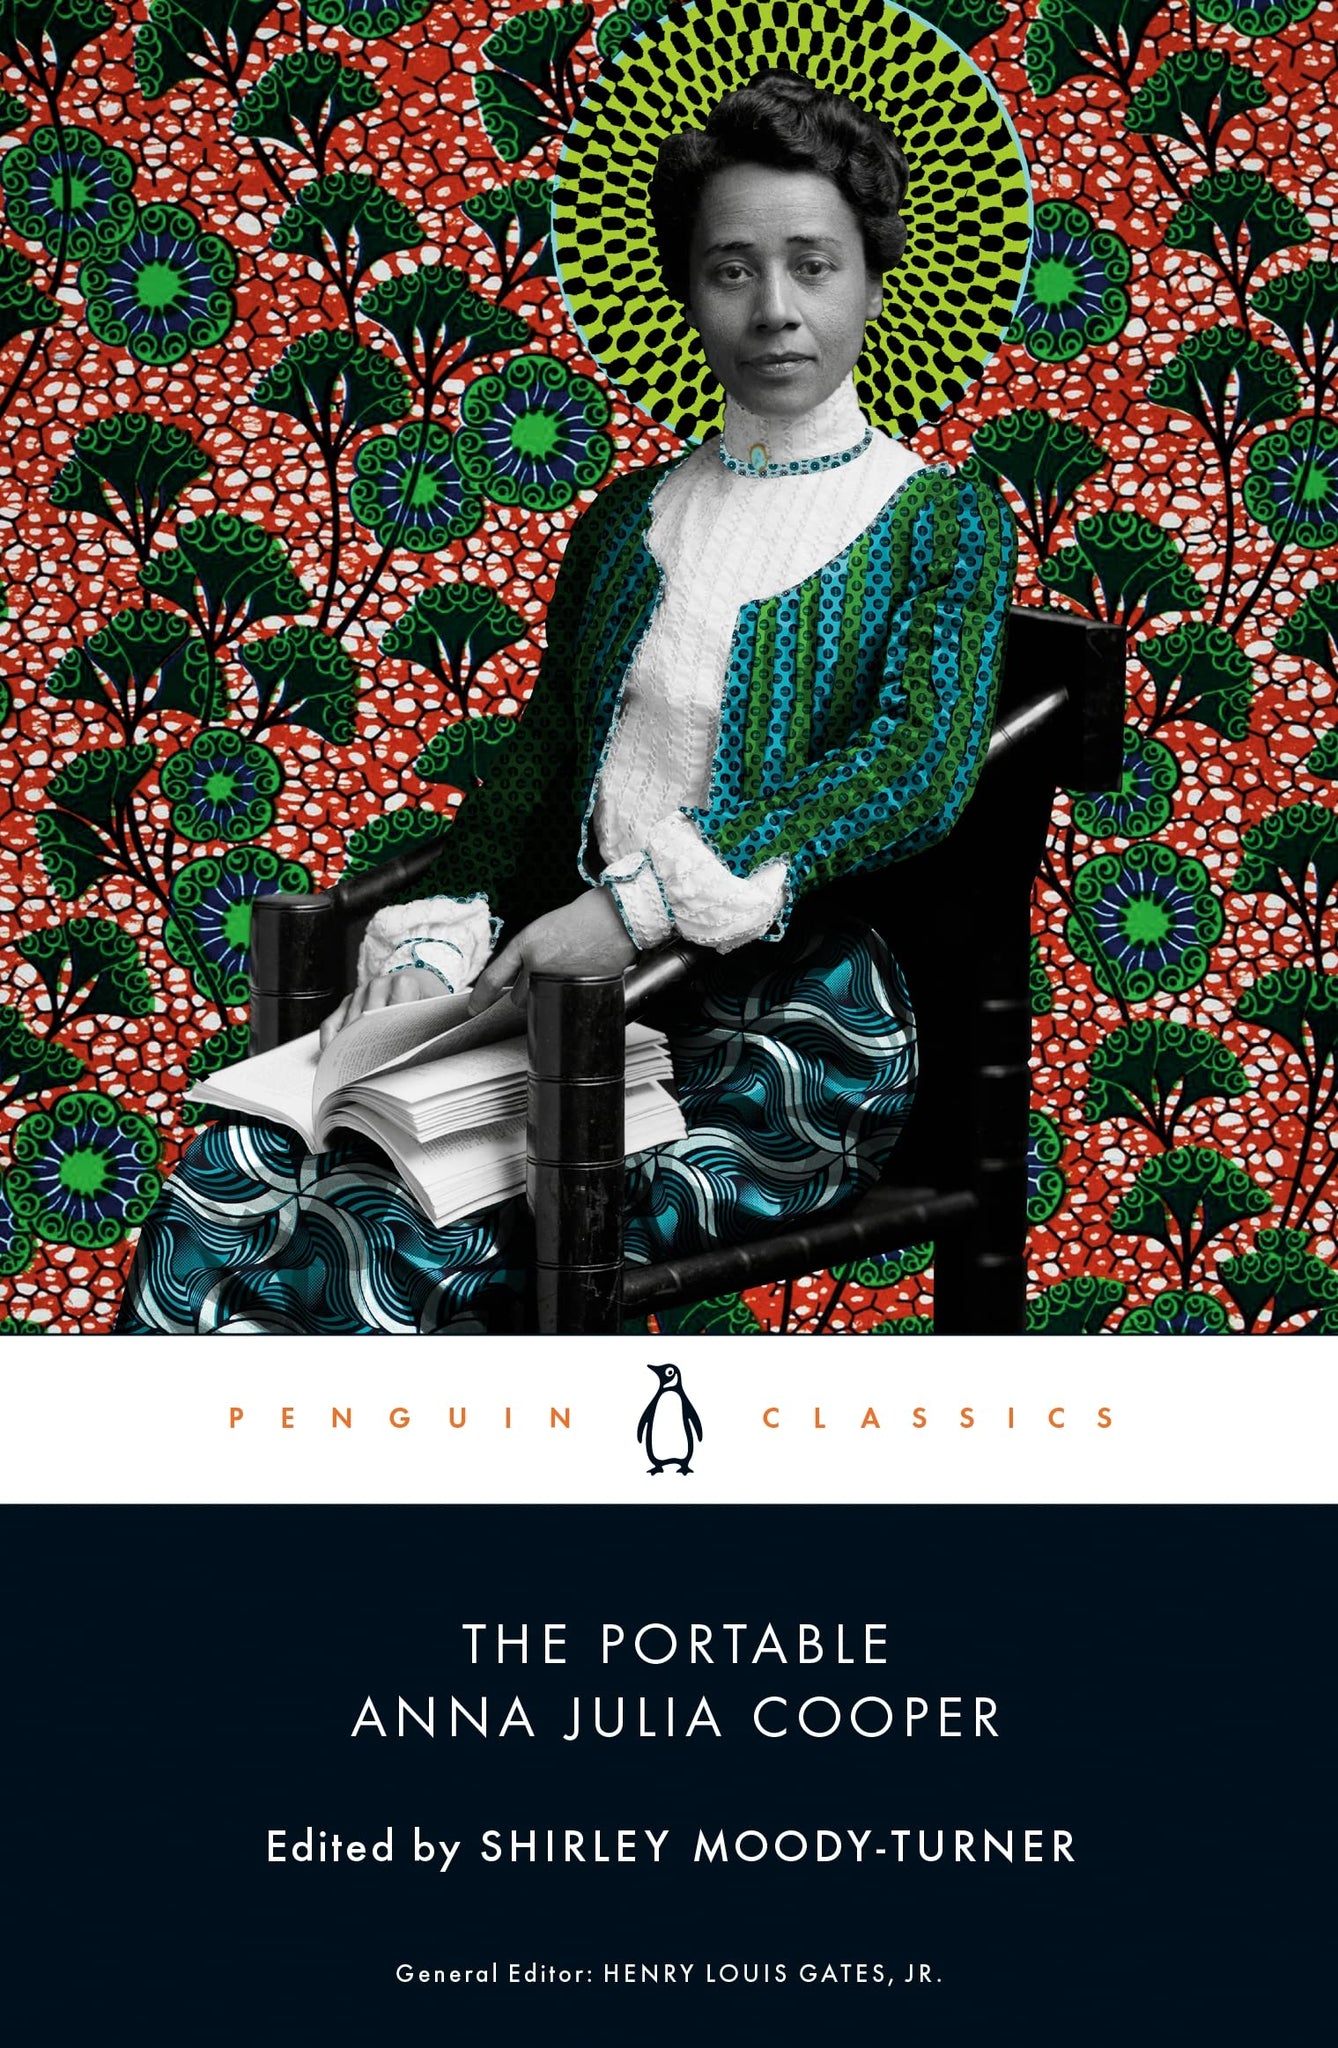 The Portable Anna Julia Cooper by Shirley Moody-Turner